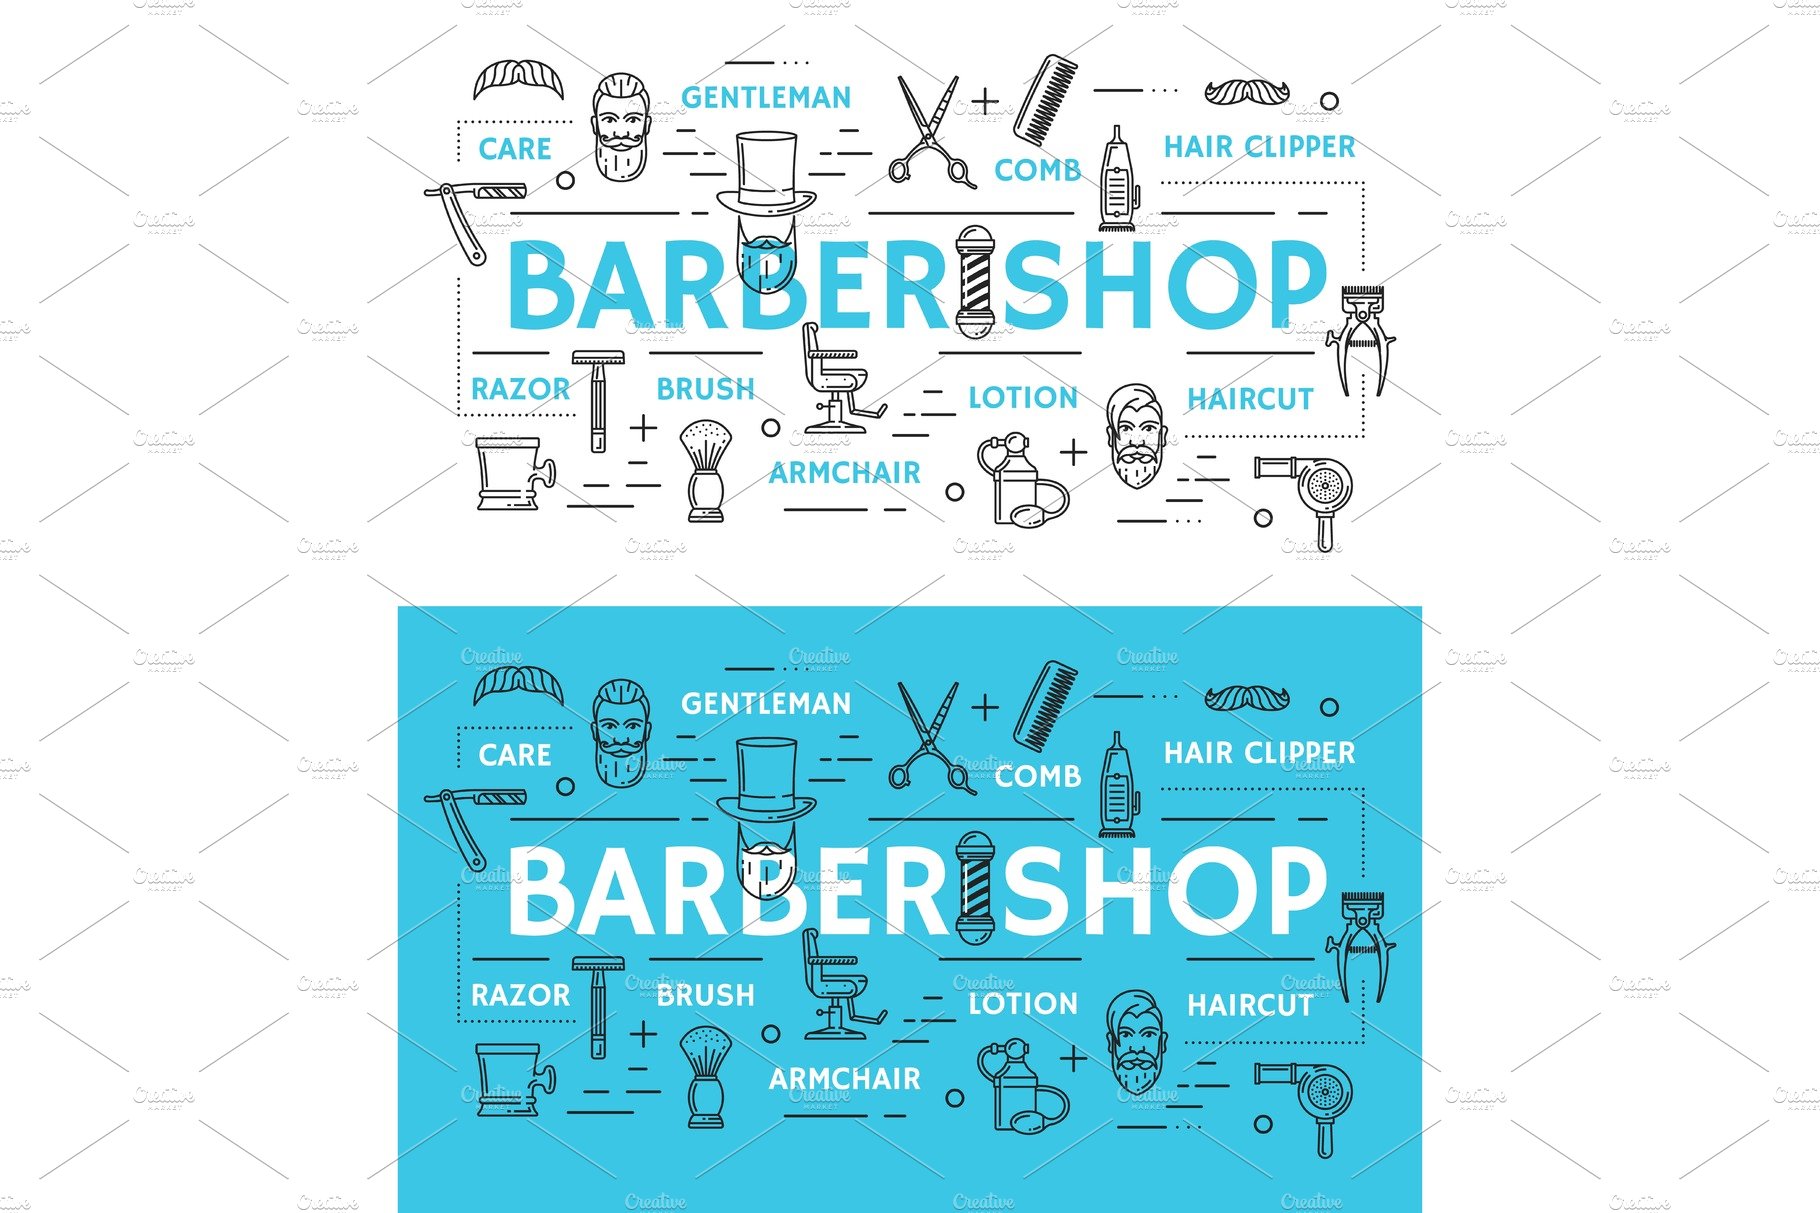 Barbershop service icons and symbols cover image.